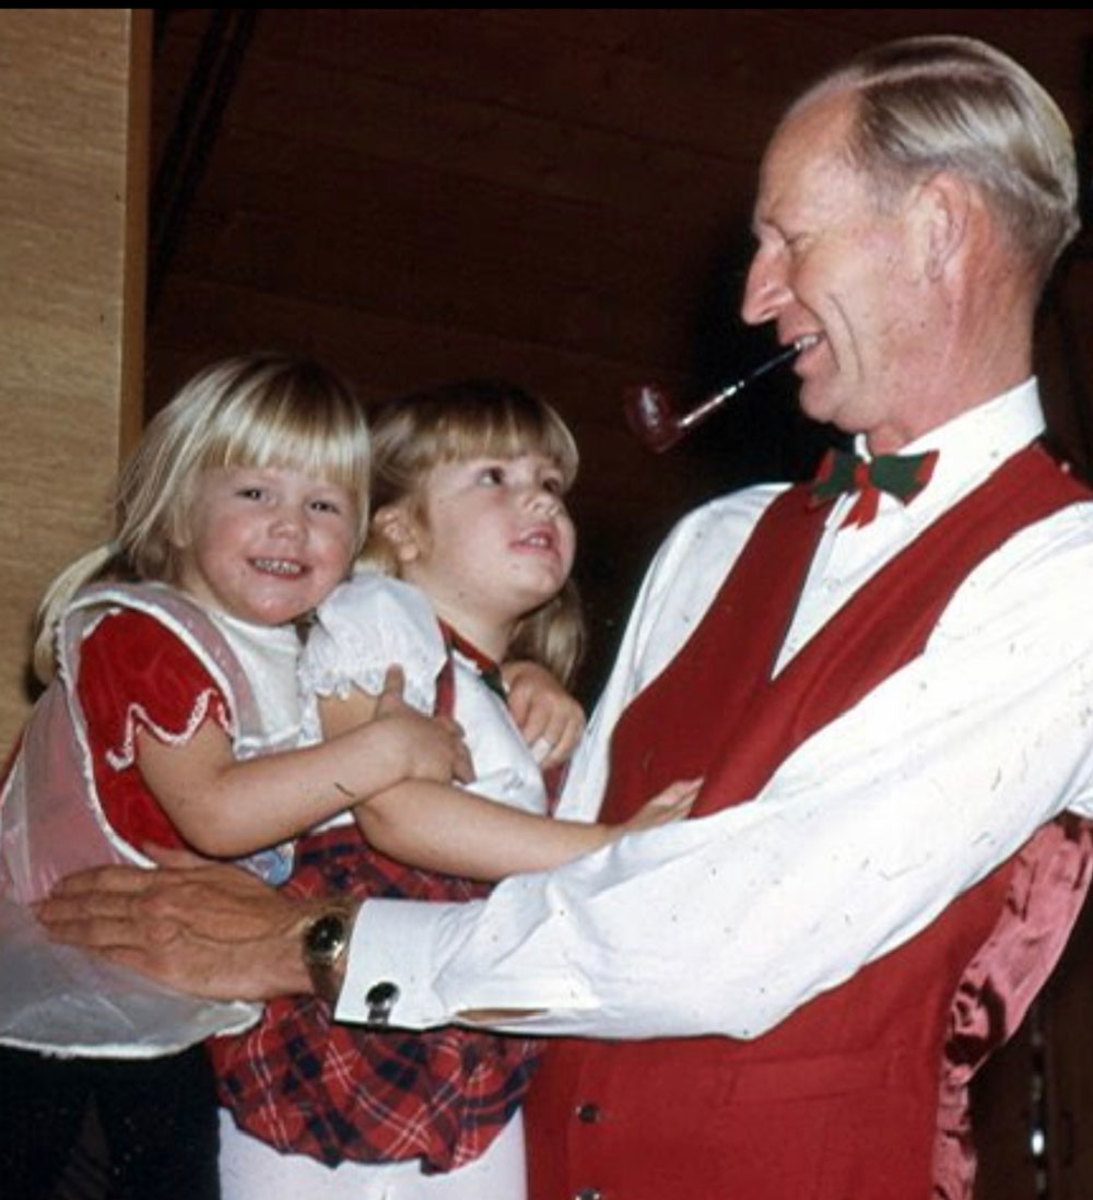 Writer Daylyn Miller as a young child (middle, age 4) and her little sister, Ingrid, snuggle with their grandfather, Hep Peterson.